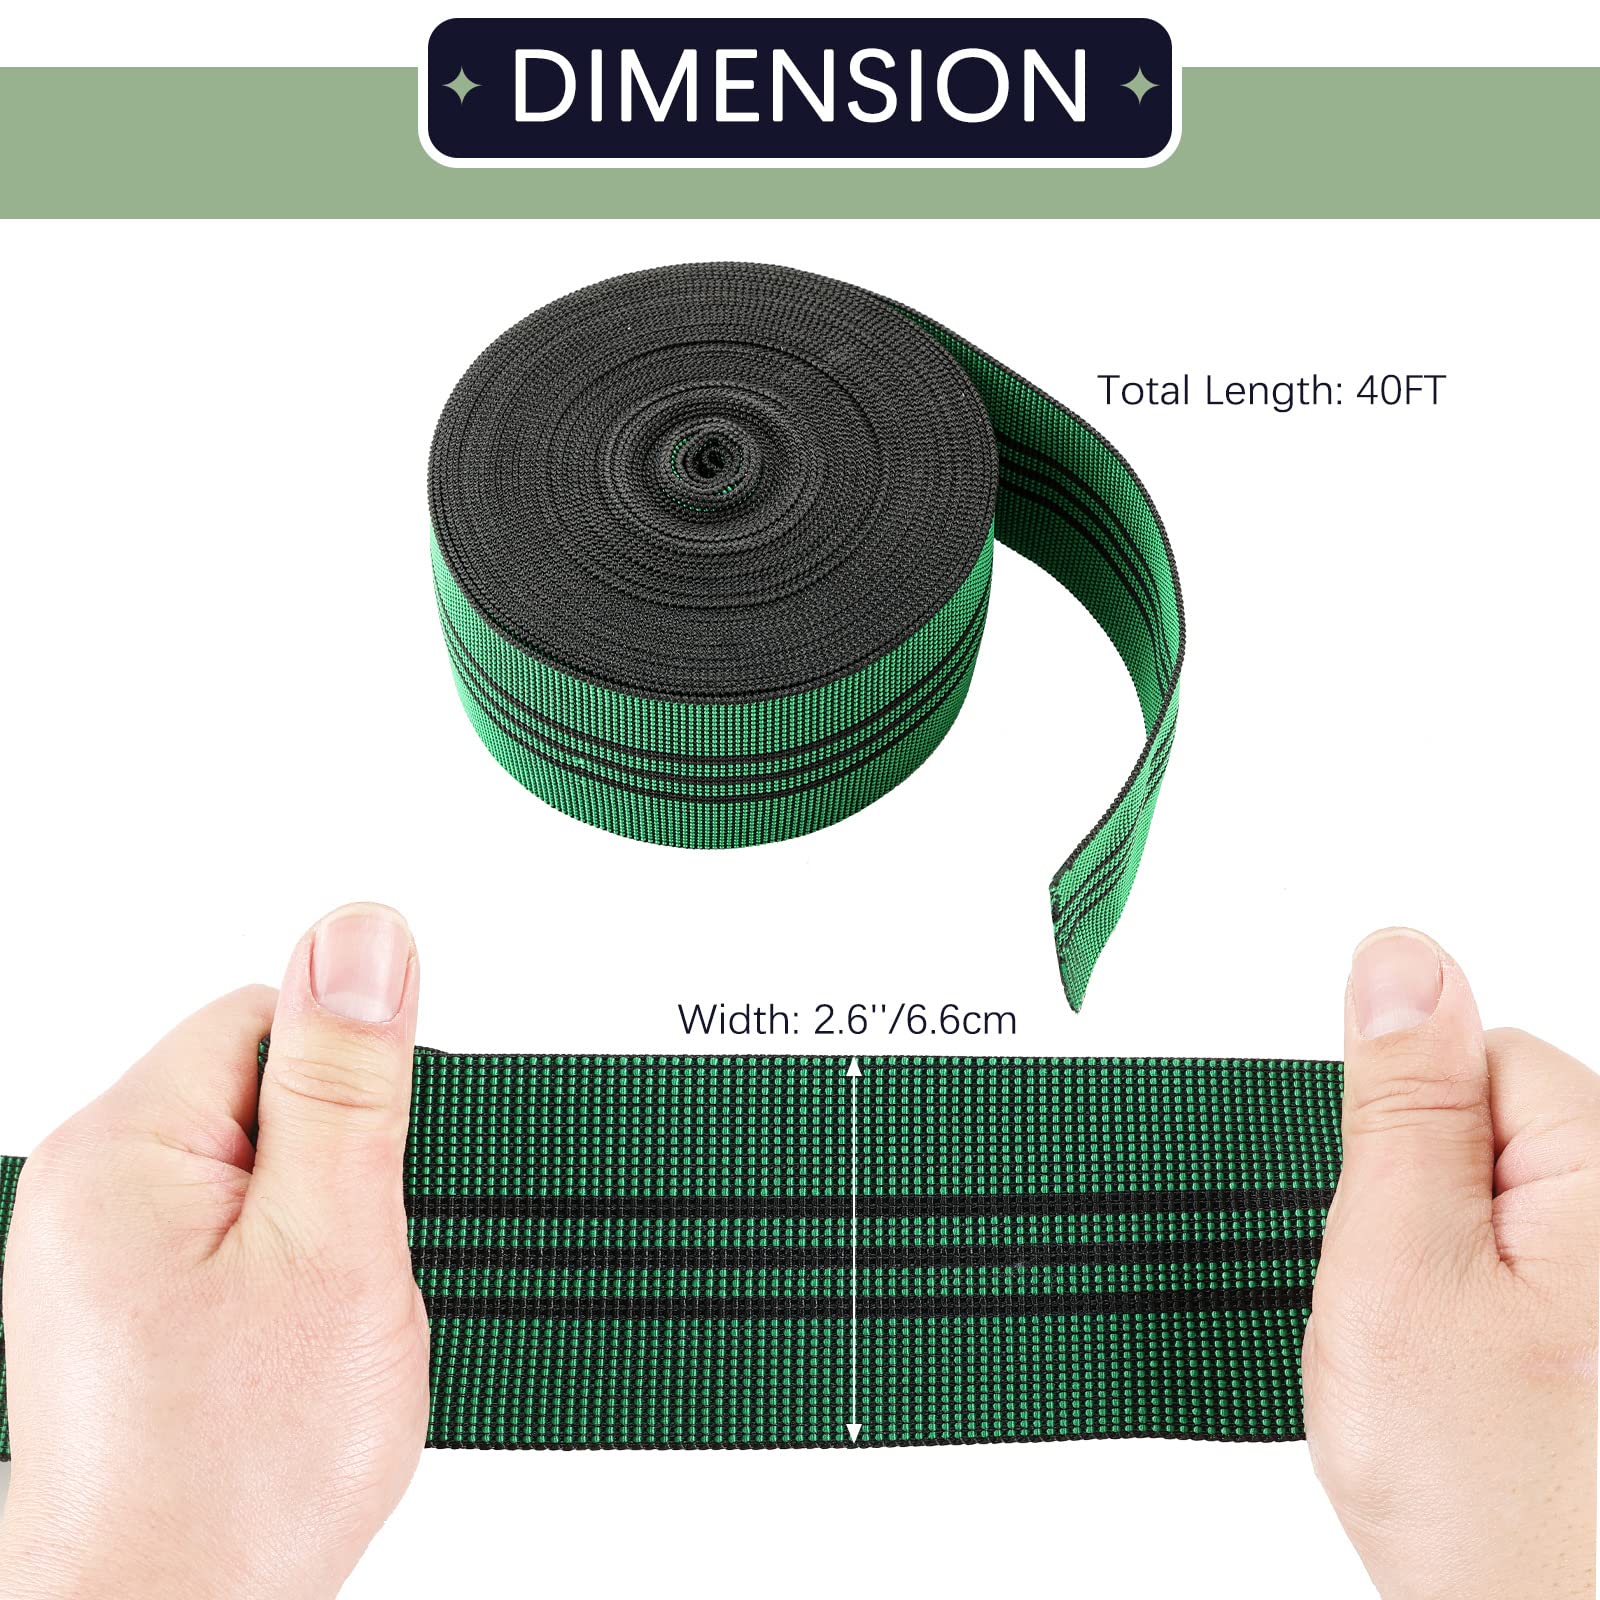 NATGAI Sofa Elastic Webbing, 40ft x 2.6inch Chair Webbing, Stretch Latex Band for Furniture Repair DIY, Upholstery Webbing Material Replacement, Stretchy Spring Alternative (3 Stripes)